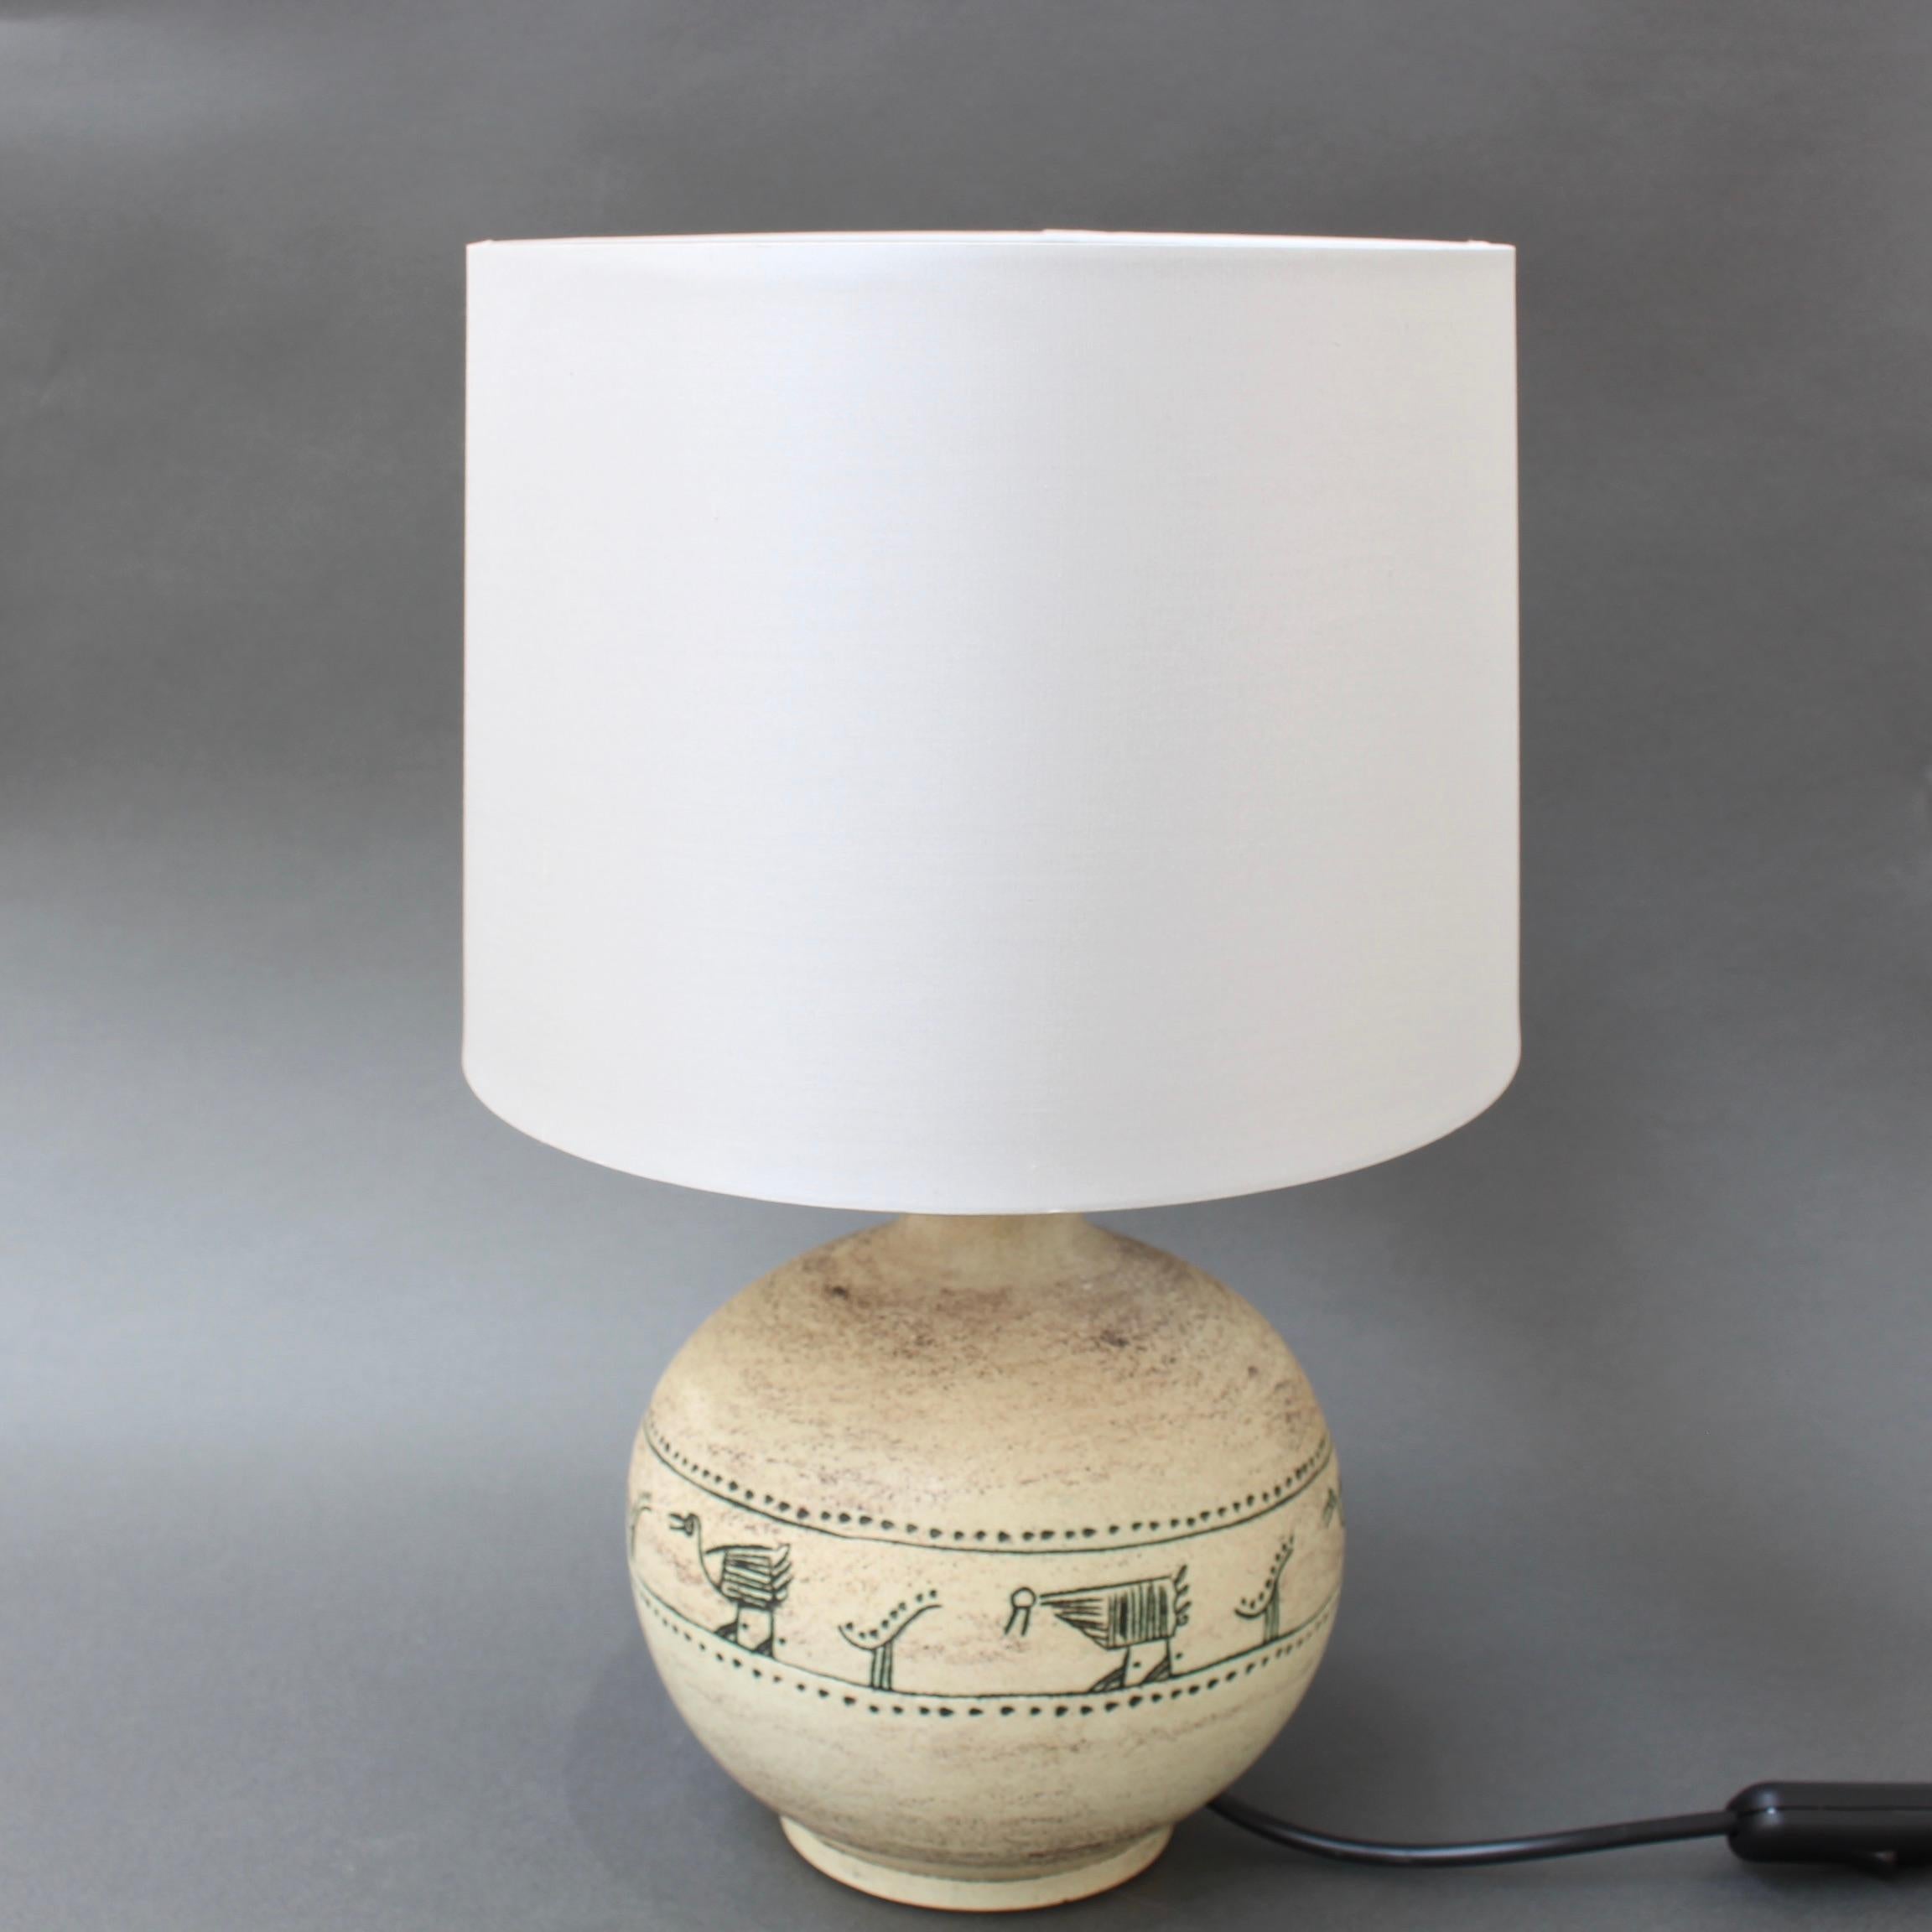 Midcentury ceramic table lamp by Jacques Blin, (circa 1950s). This beautifully off-white lamp with sgraffito-etched fanciful animals and birds over the trademark misty glaze with dusty effect finish is quintessential Jacques Blin. In good condition